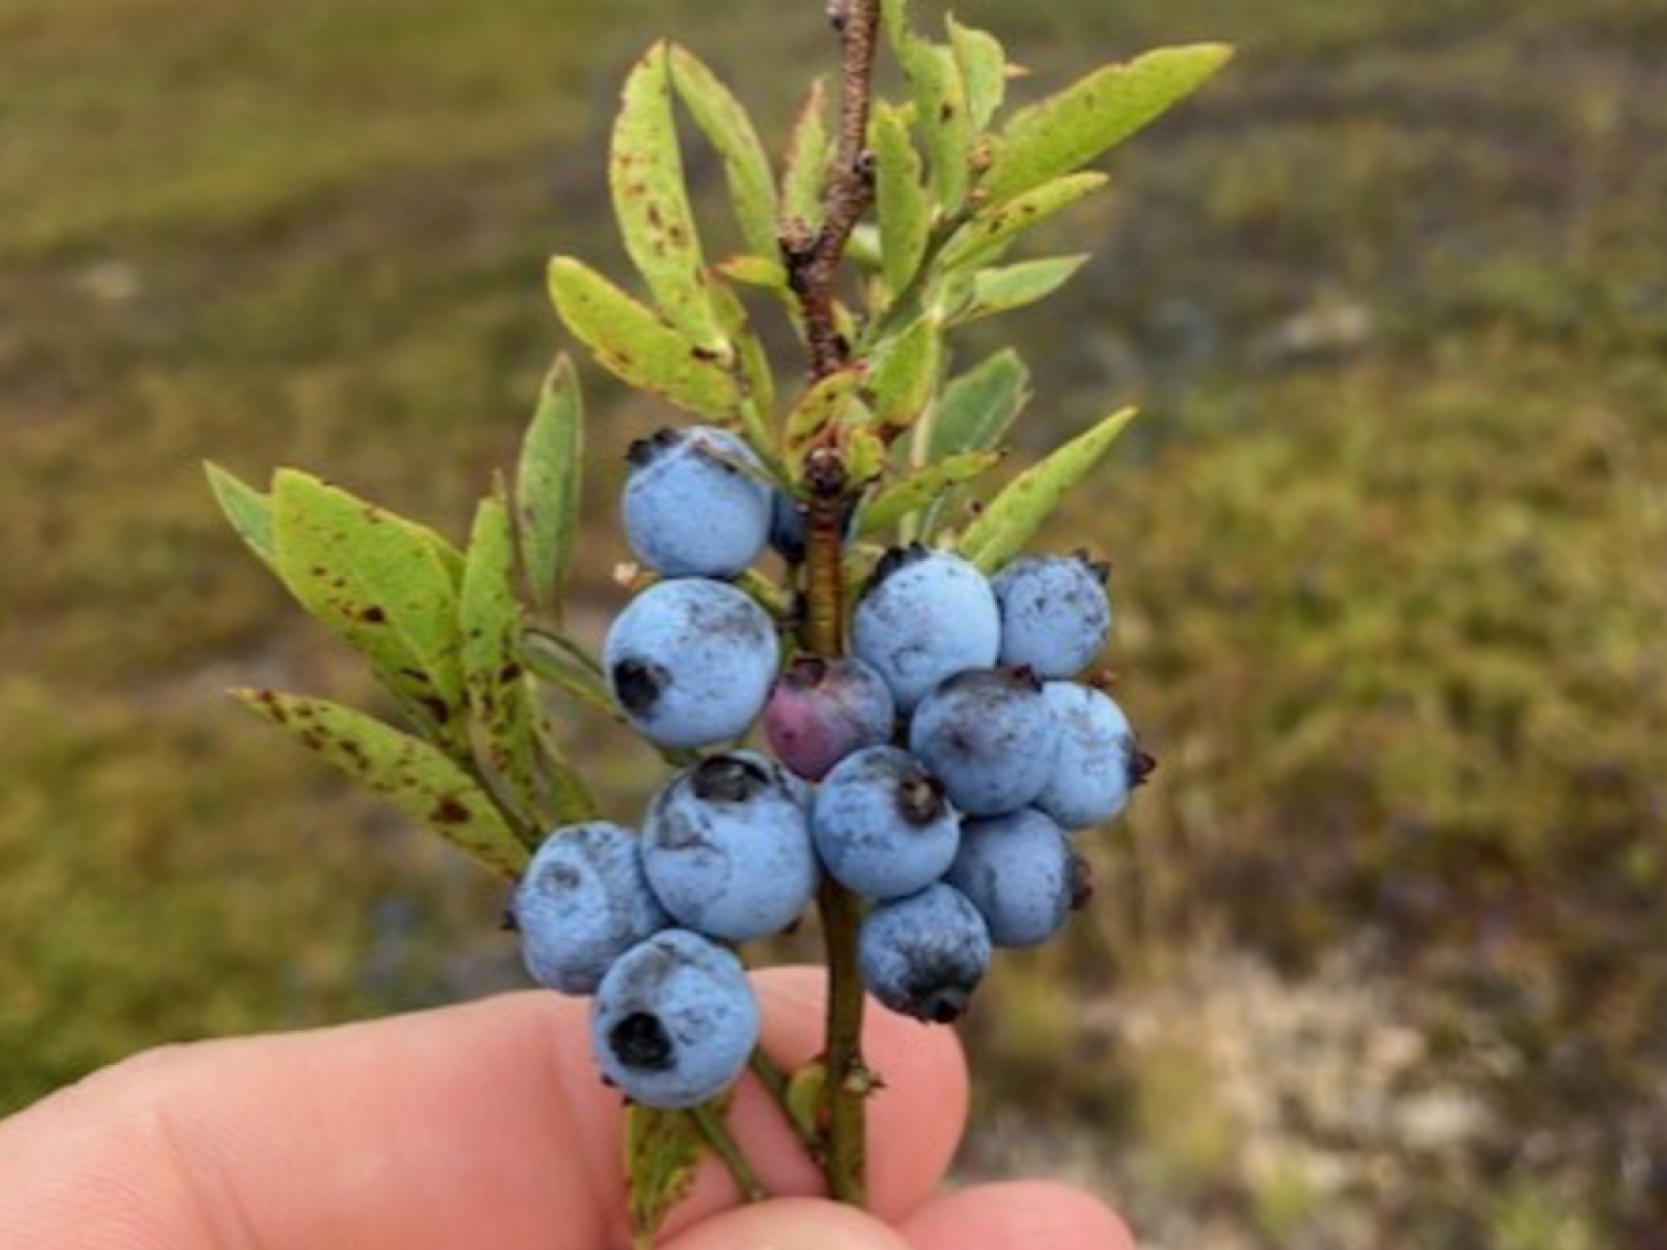 Blueberry Fields Forever: Sureway’s Role as an On-Site Agent